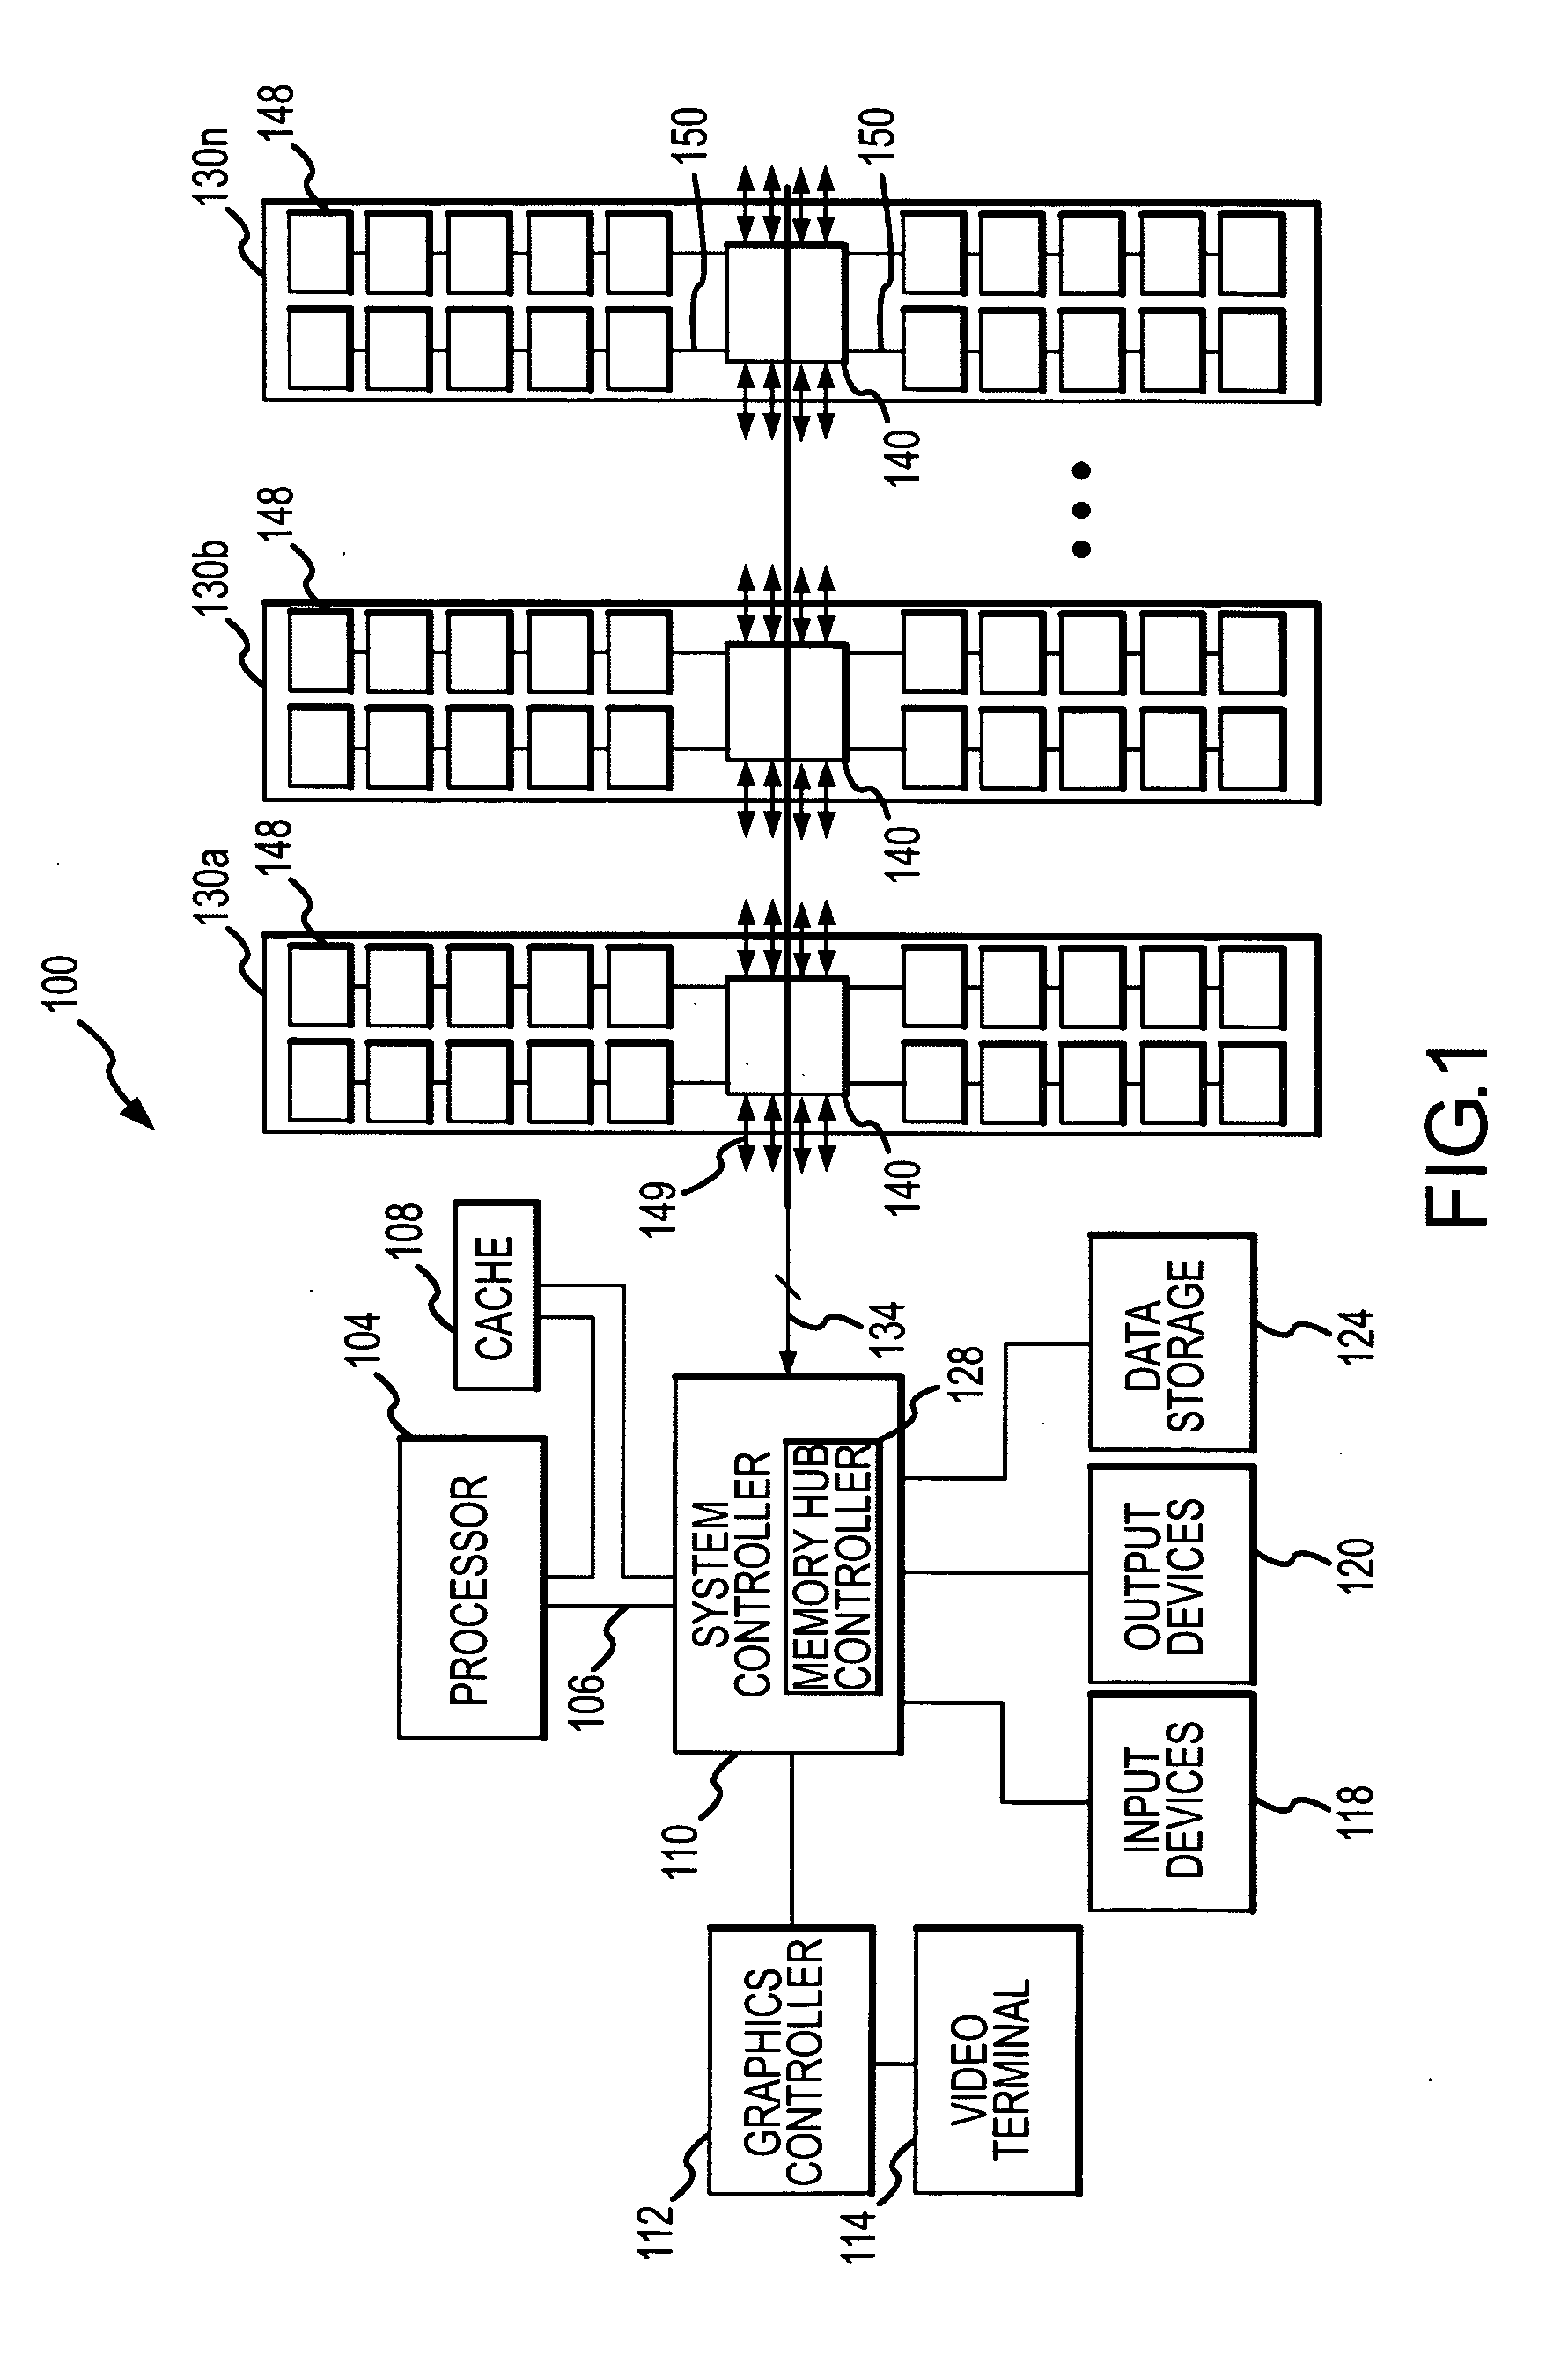 Memory hub and method for memory sequencing